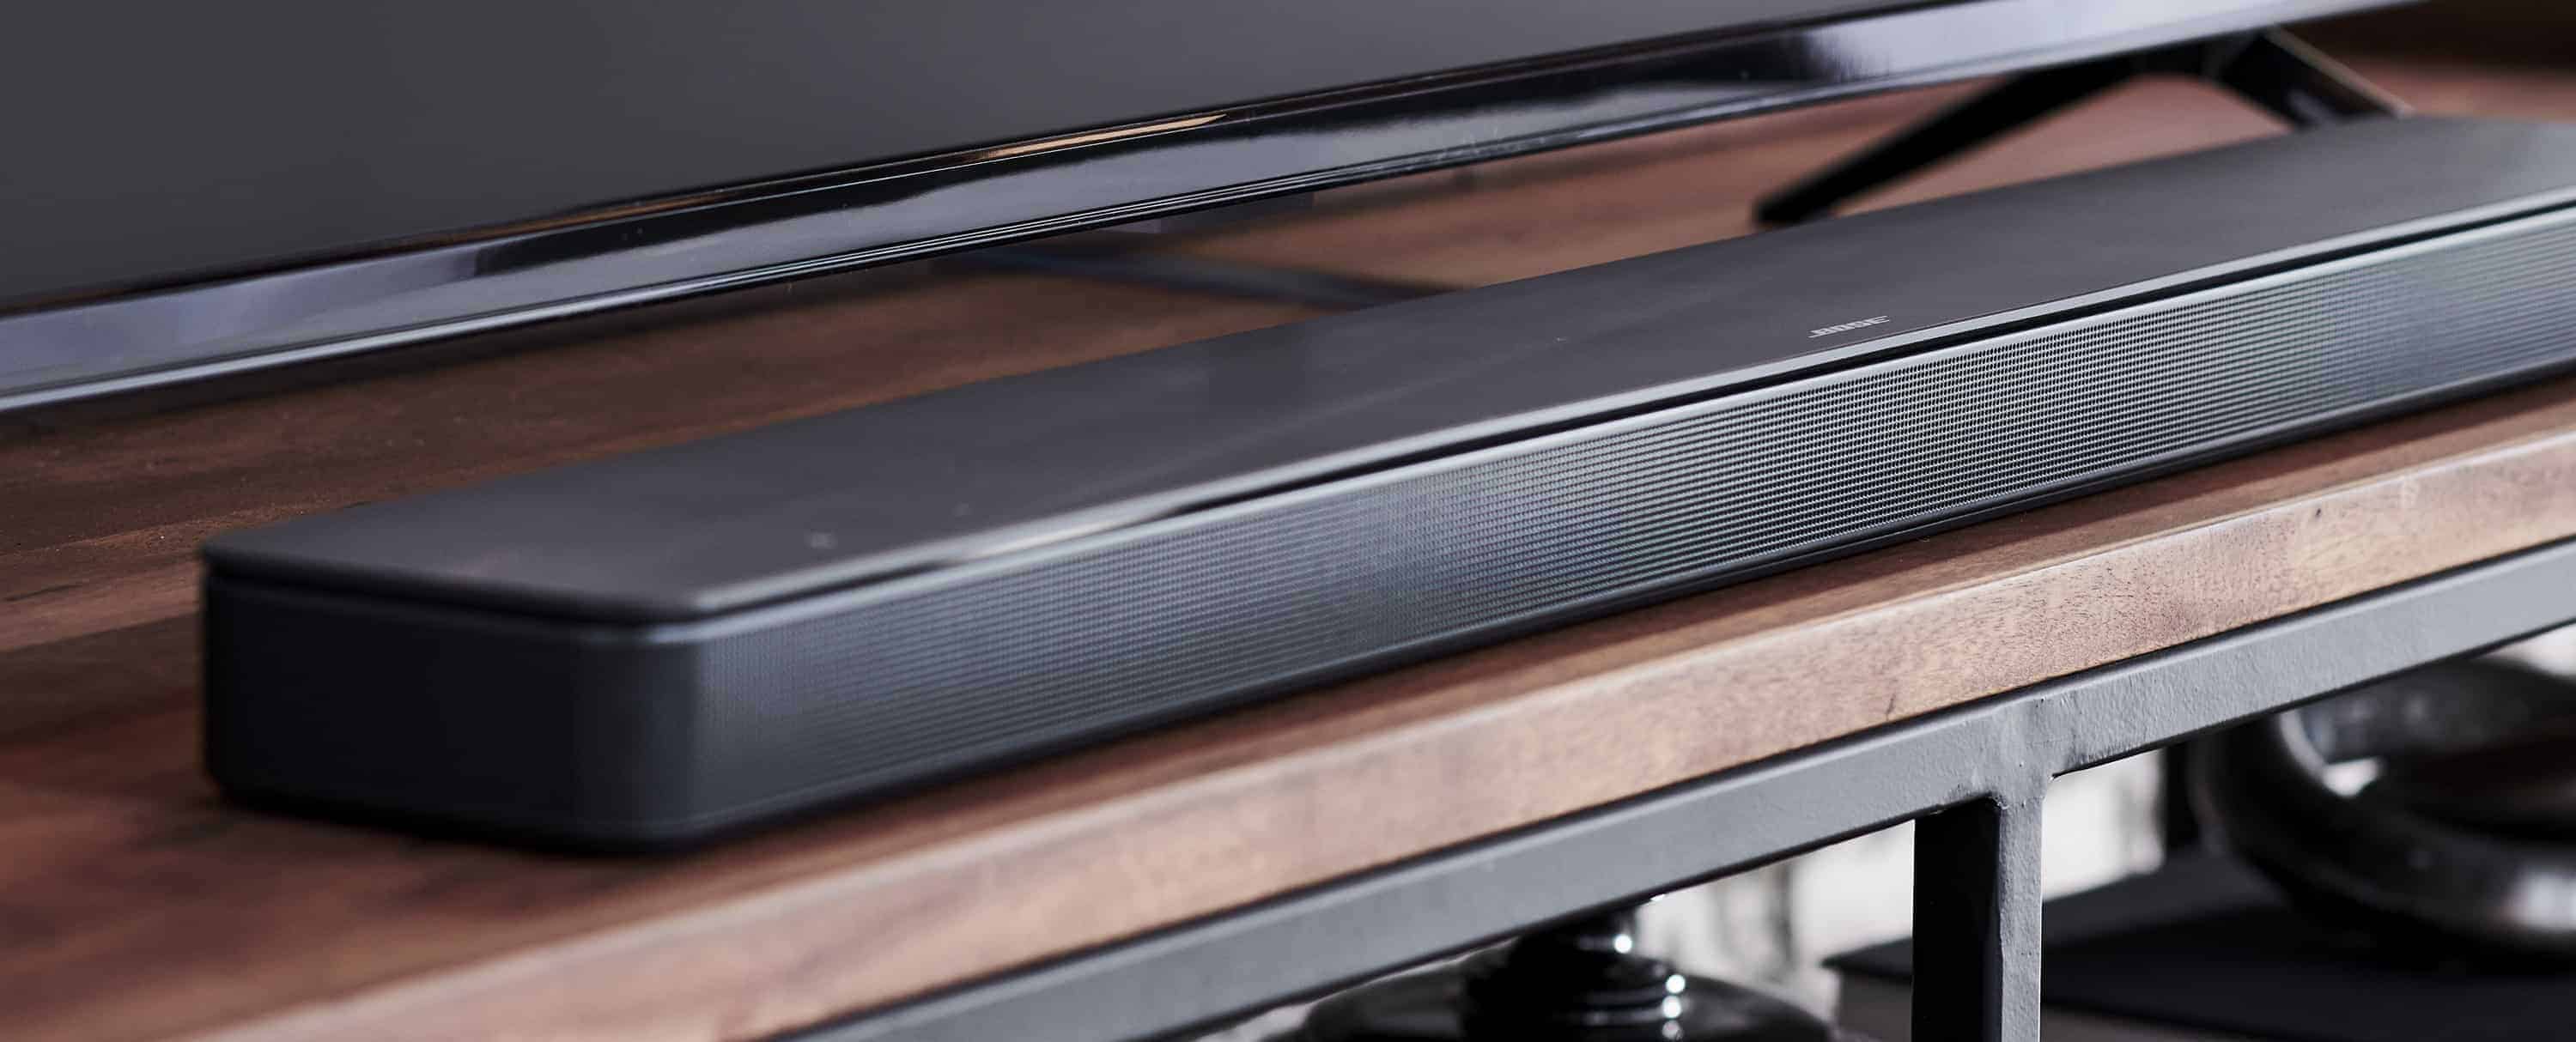 Bose Launches New Smart Speaker And Soundbars High Resolution Audio